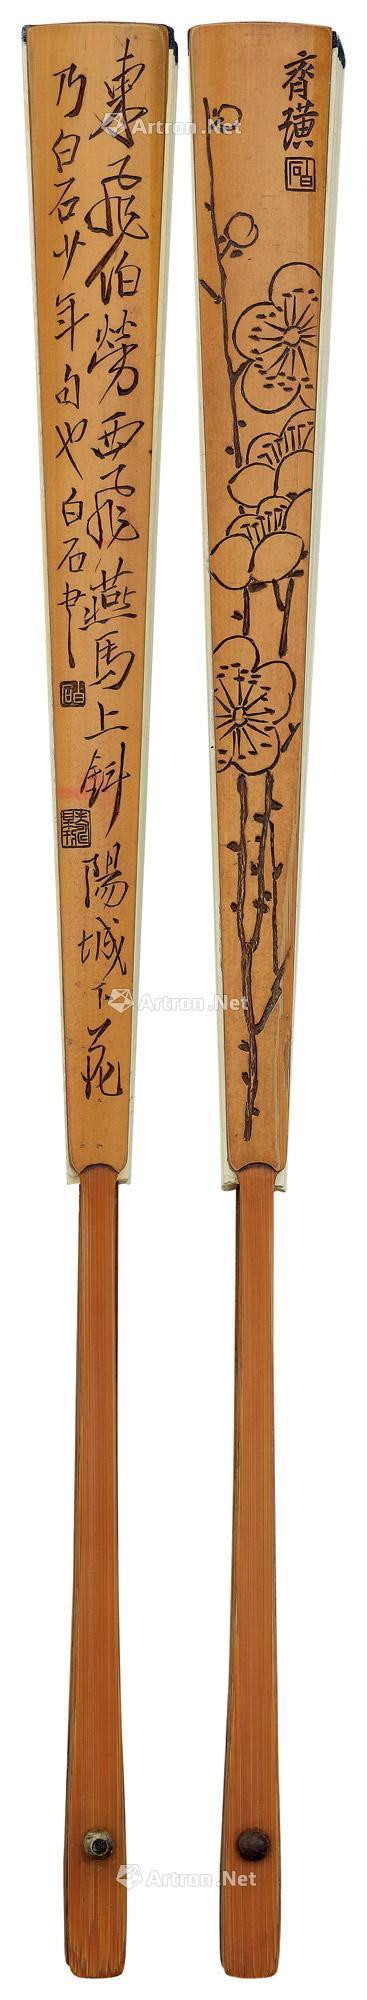 A BAMBOO FAN RIB CARVED WITH QI BAISHI’S PLUM BLOSSOM AND CALLIGRAPHY IN RUNNING SCRIPT